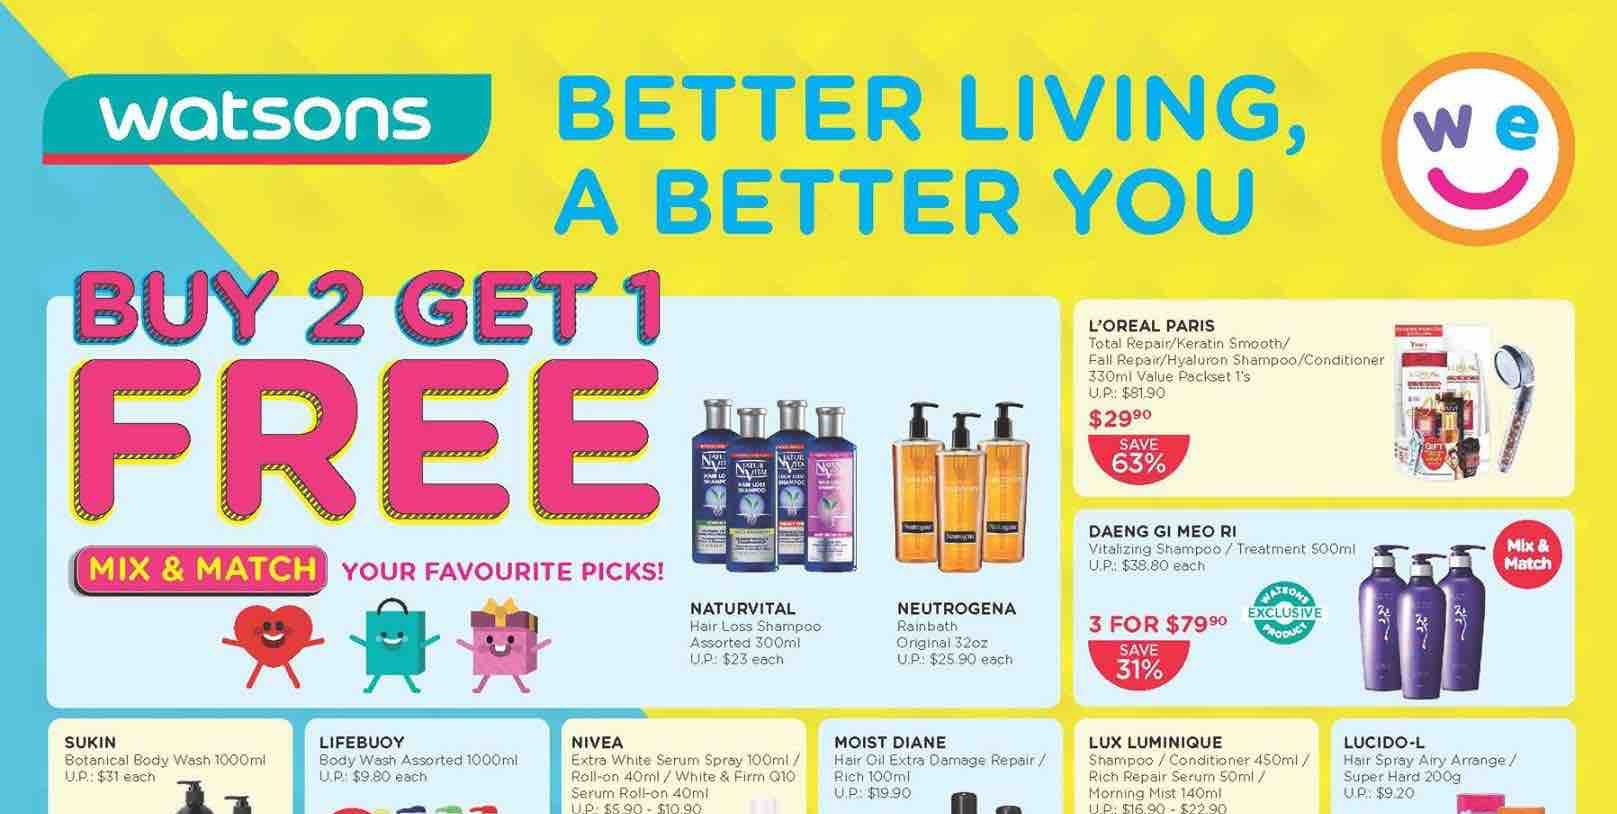 Watsons Singapore MIX & MATCH Enjoy 2nd Buy at 50% Off Promotion ends 31 May 2017